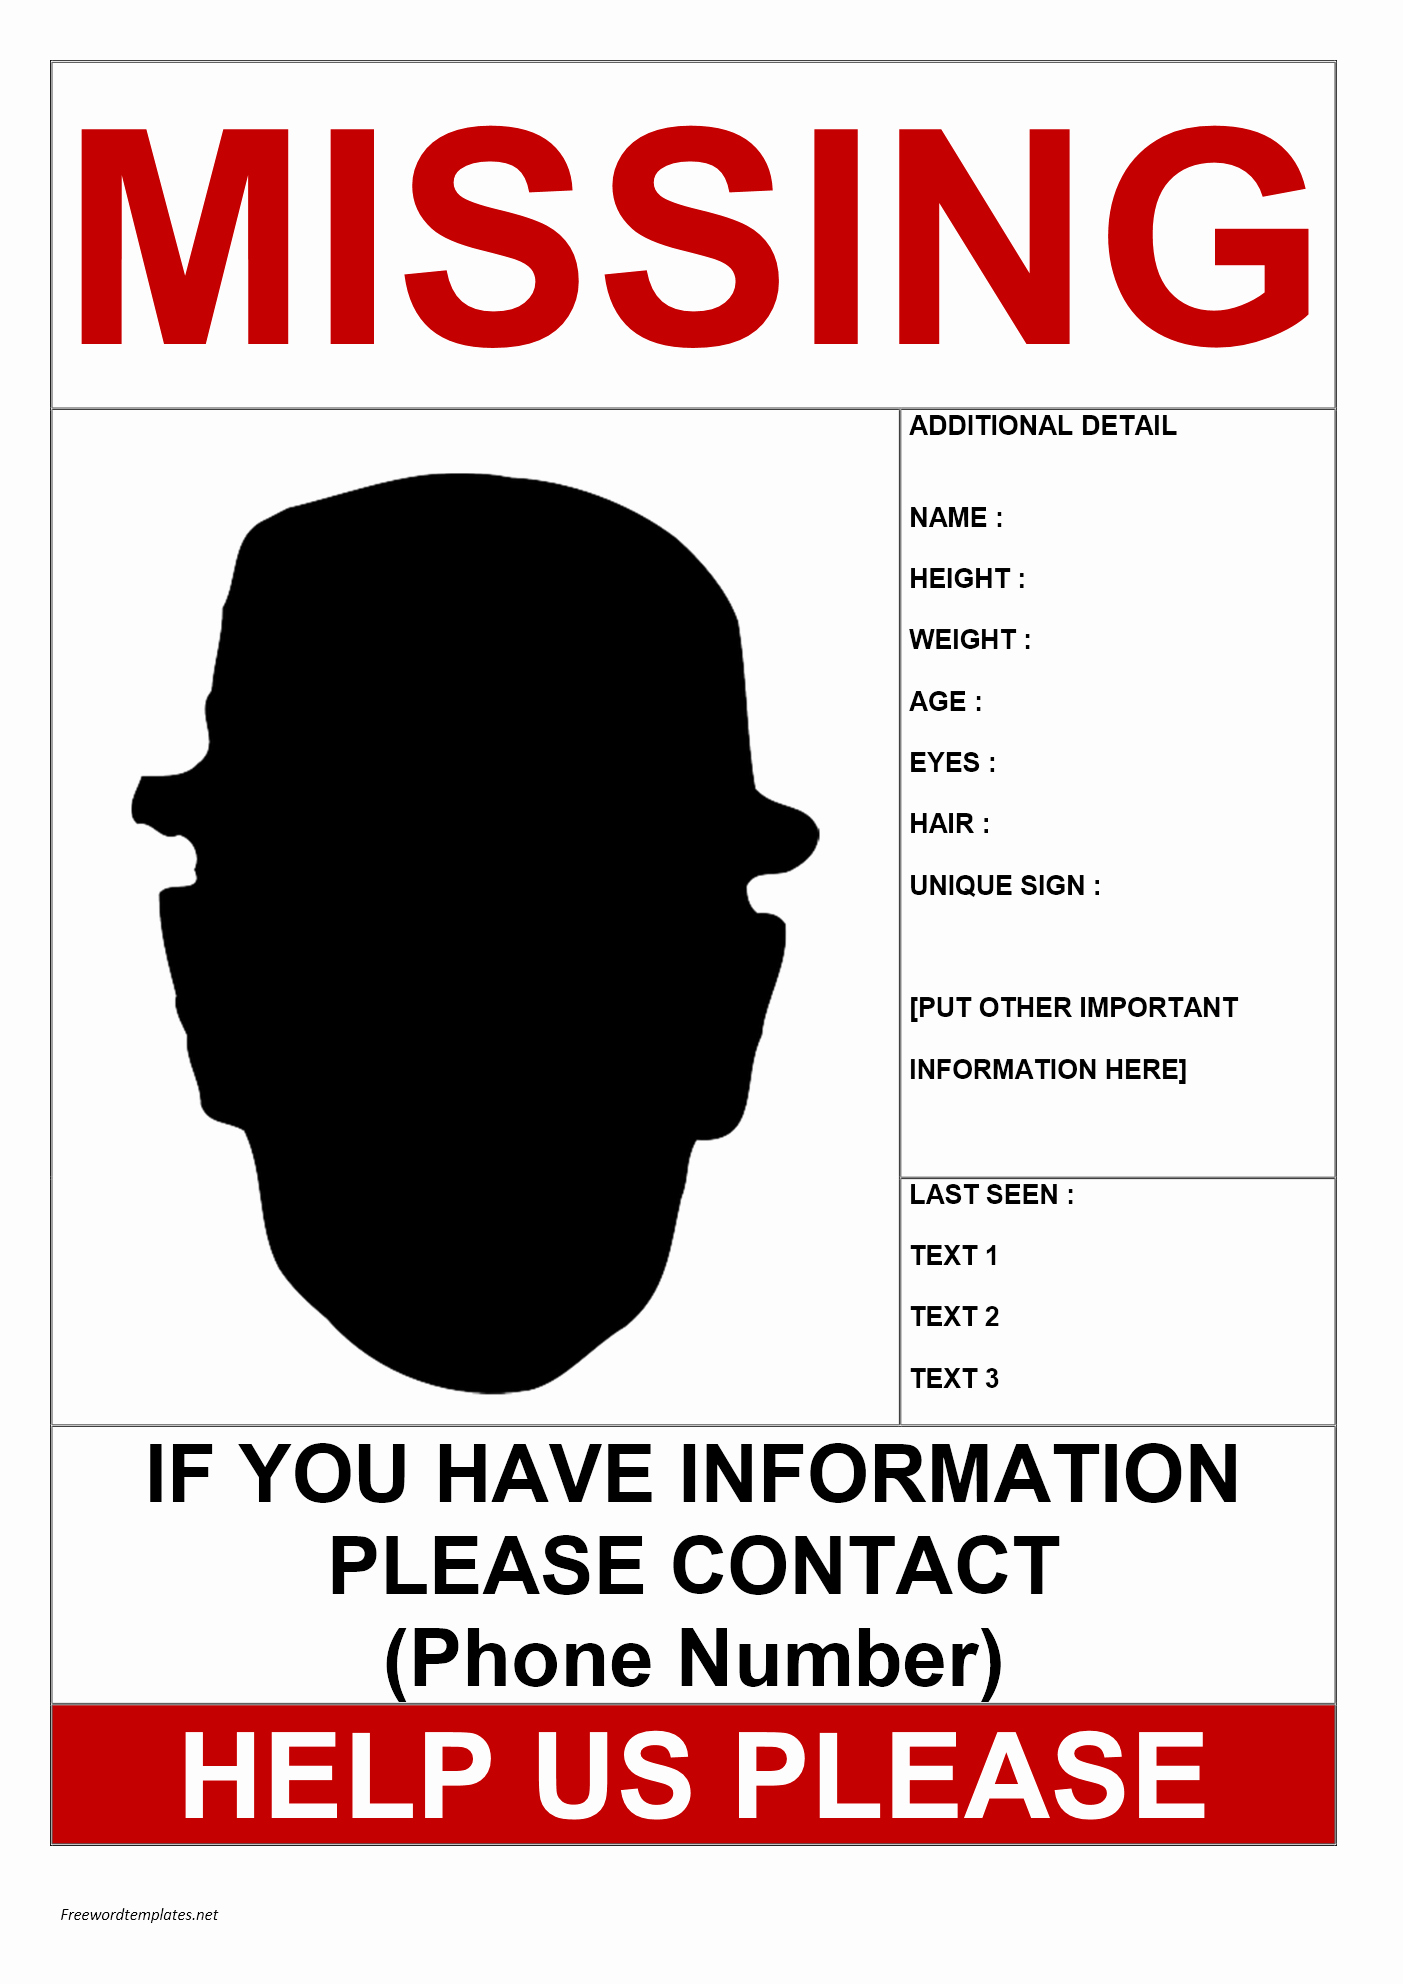 Missing Person Poster Template Lovely Missing Person Poster Template